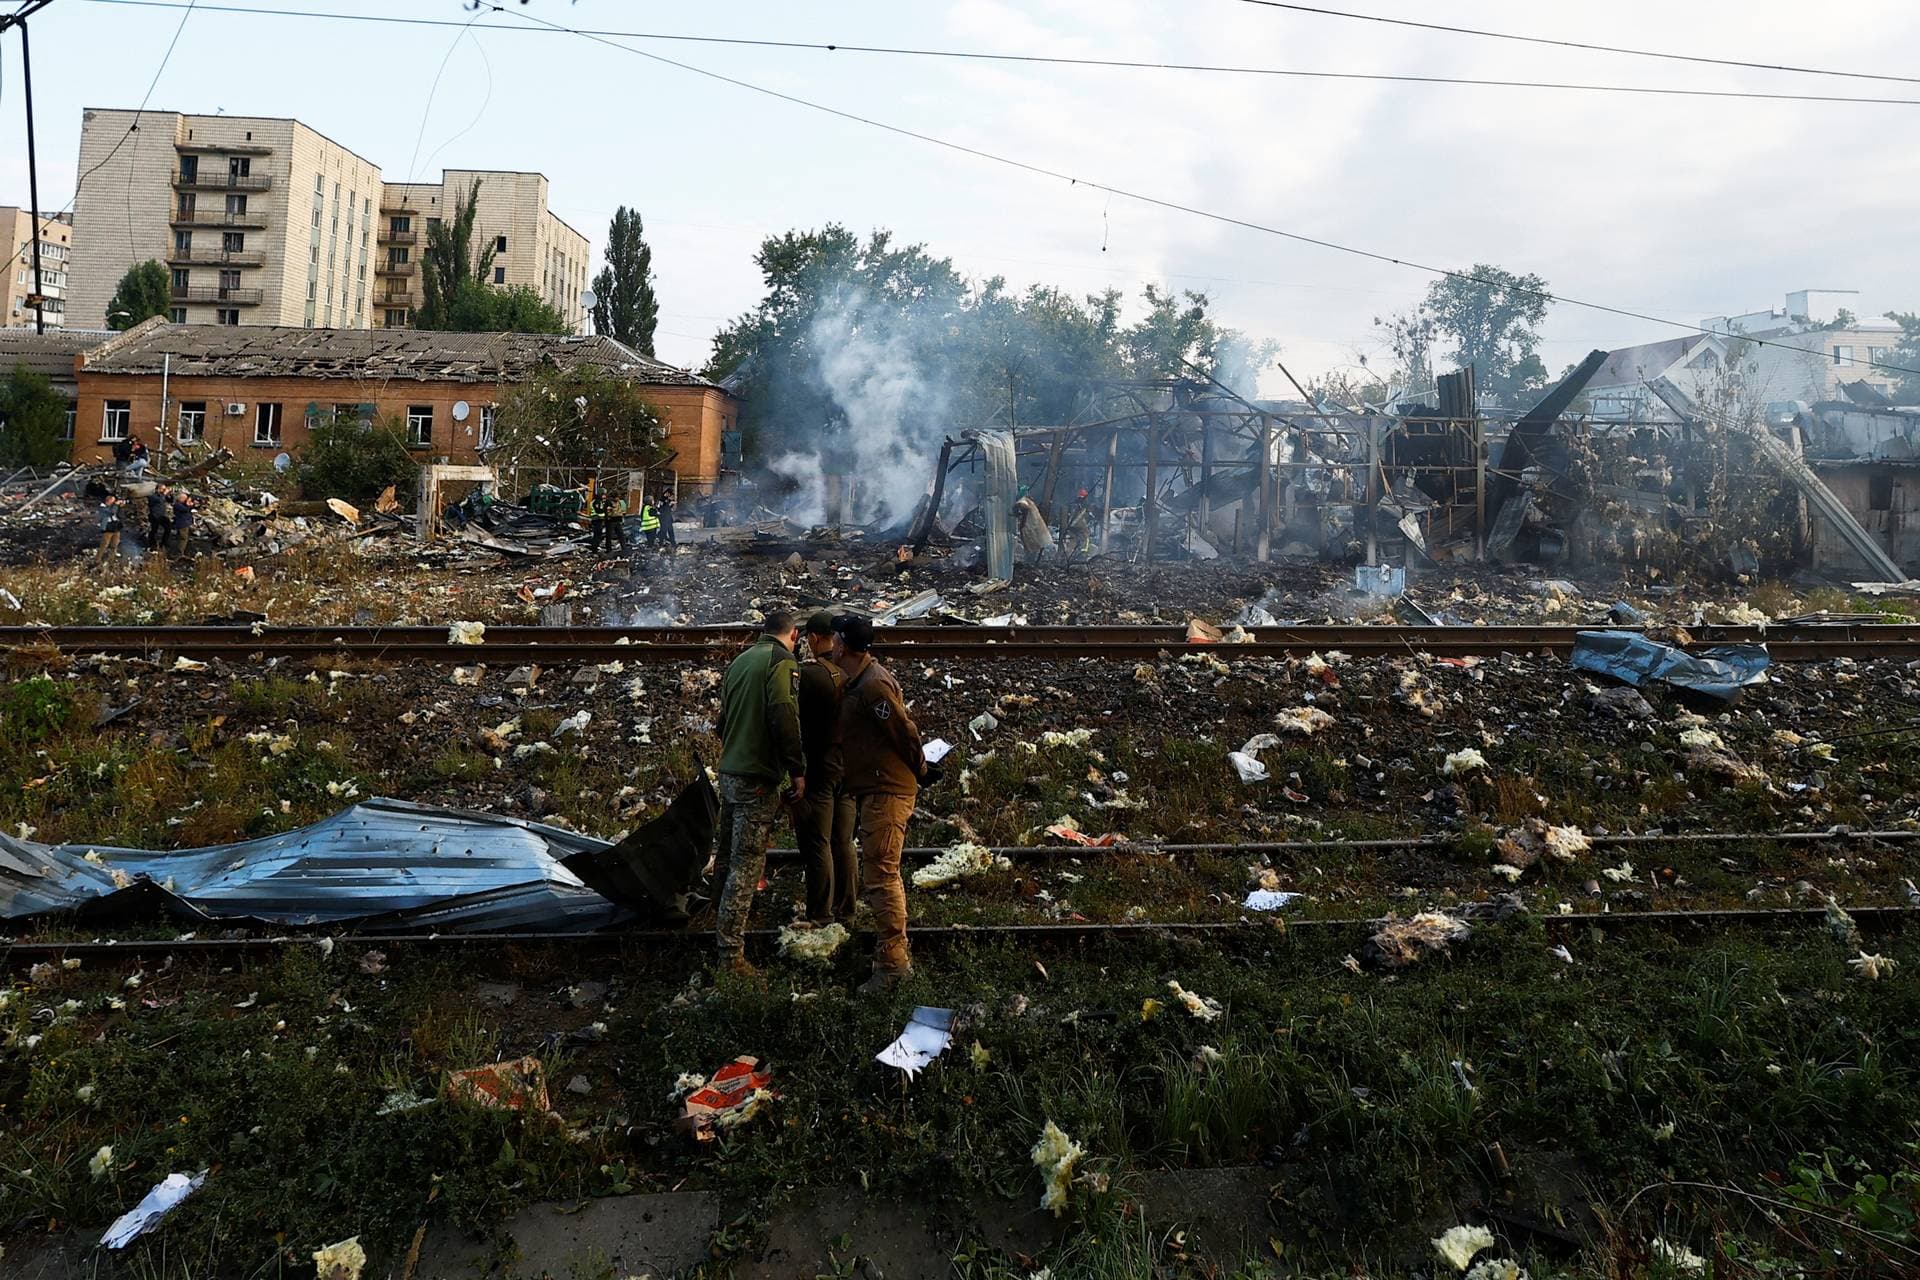 Emergency personnel examine debris at the still-smoking site in Kyiv